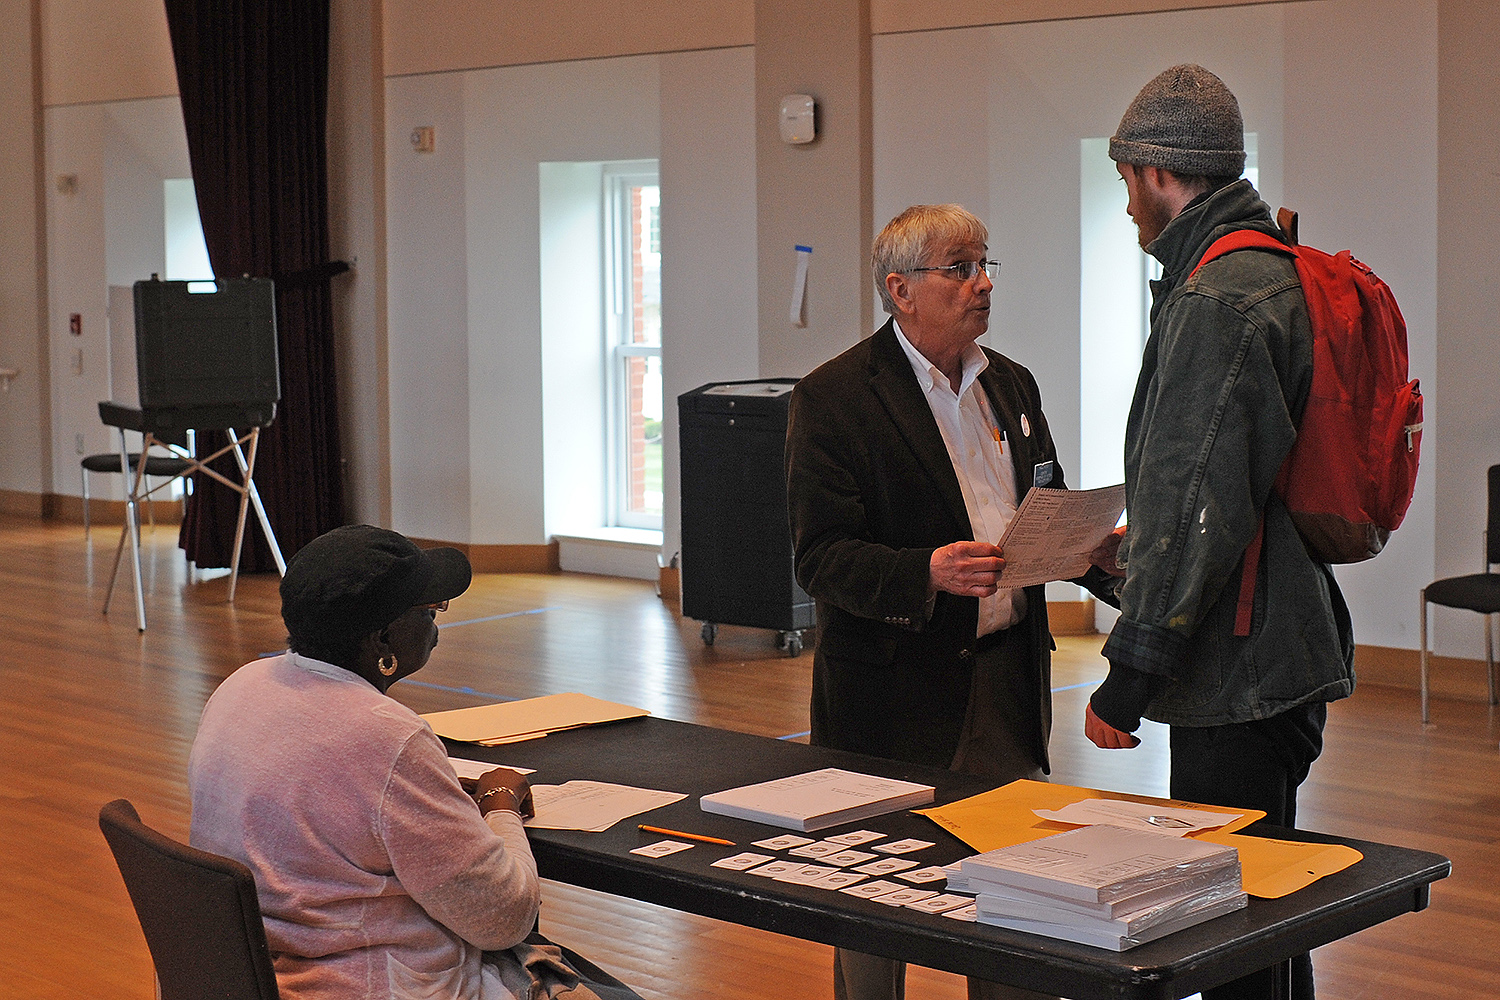 Voting for the Primary Election in Beckham Hall, April 26, 2016.